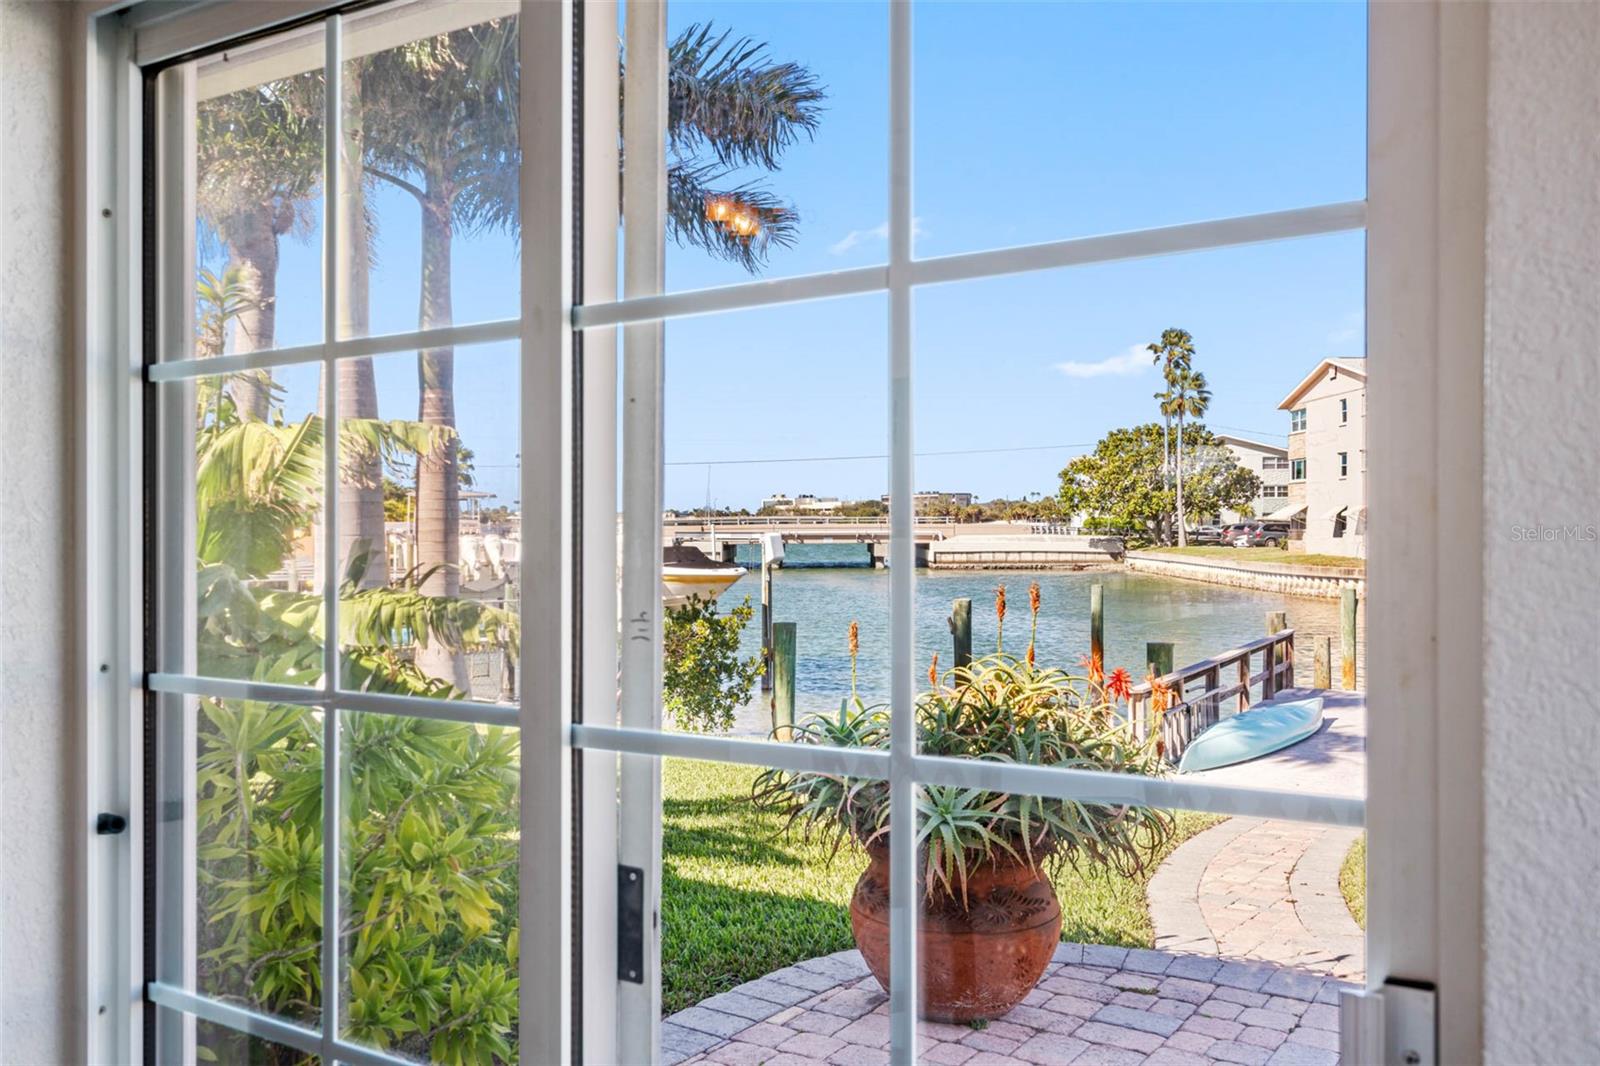 Unwind in your own private oasis: Where fertile landscapes meet coastal charm.